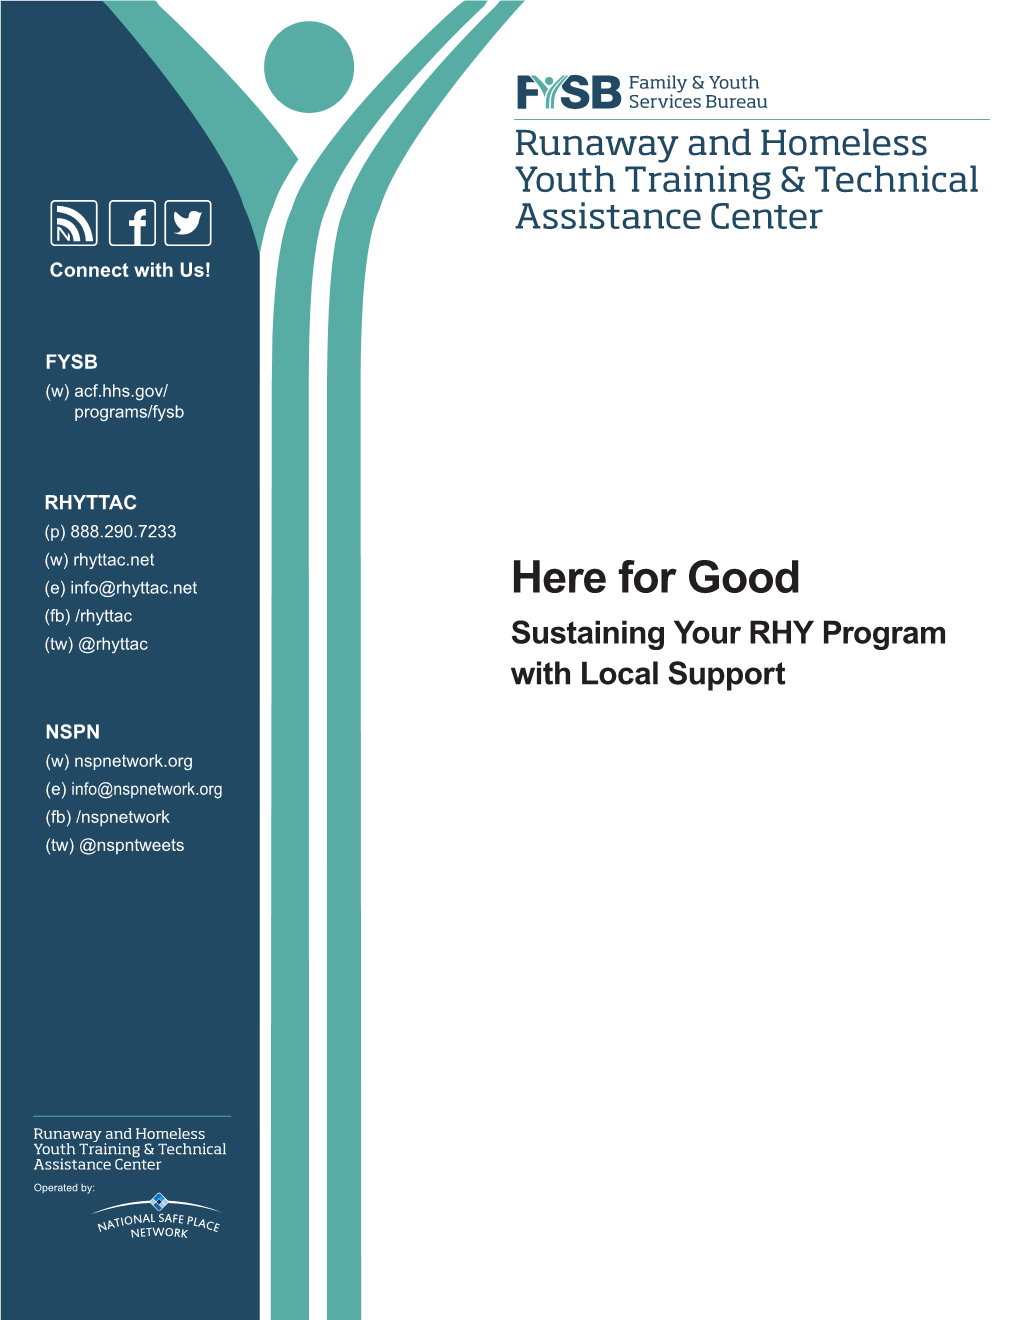 Here for Good (Fb) /Rhyttac (Tw) @Rhyttac Sustaining Your RHY Program with Local Support